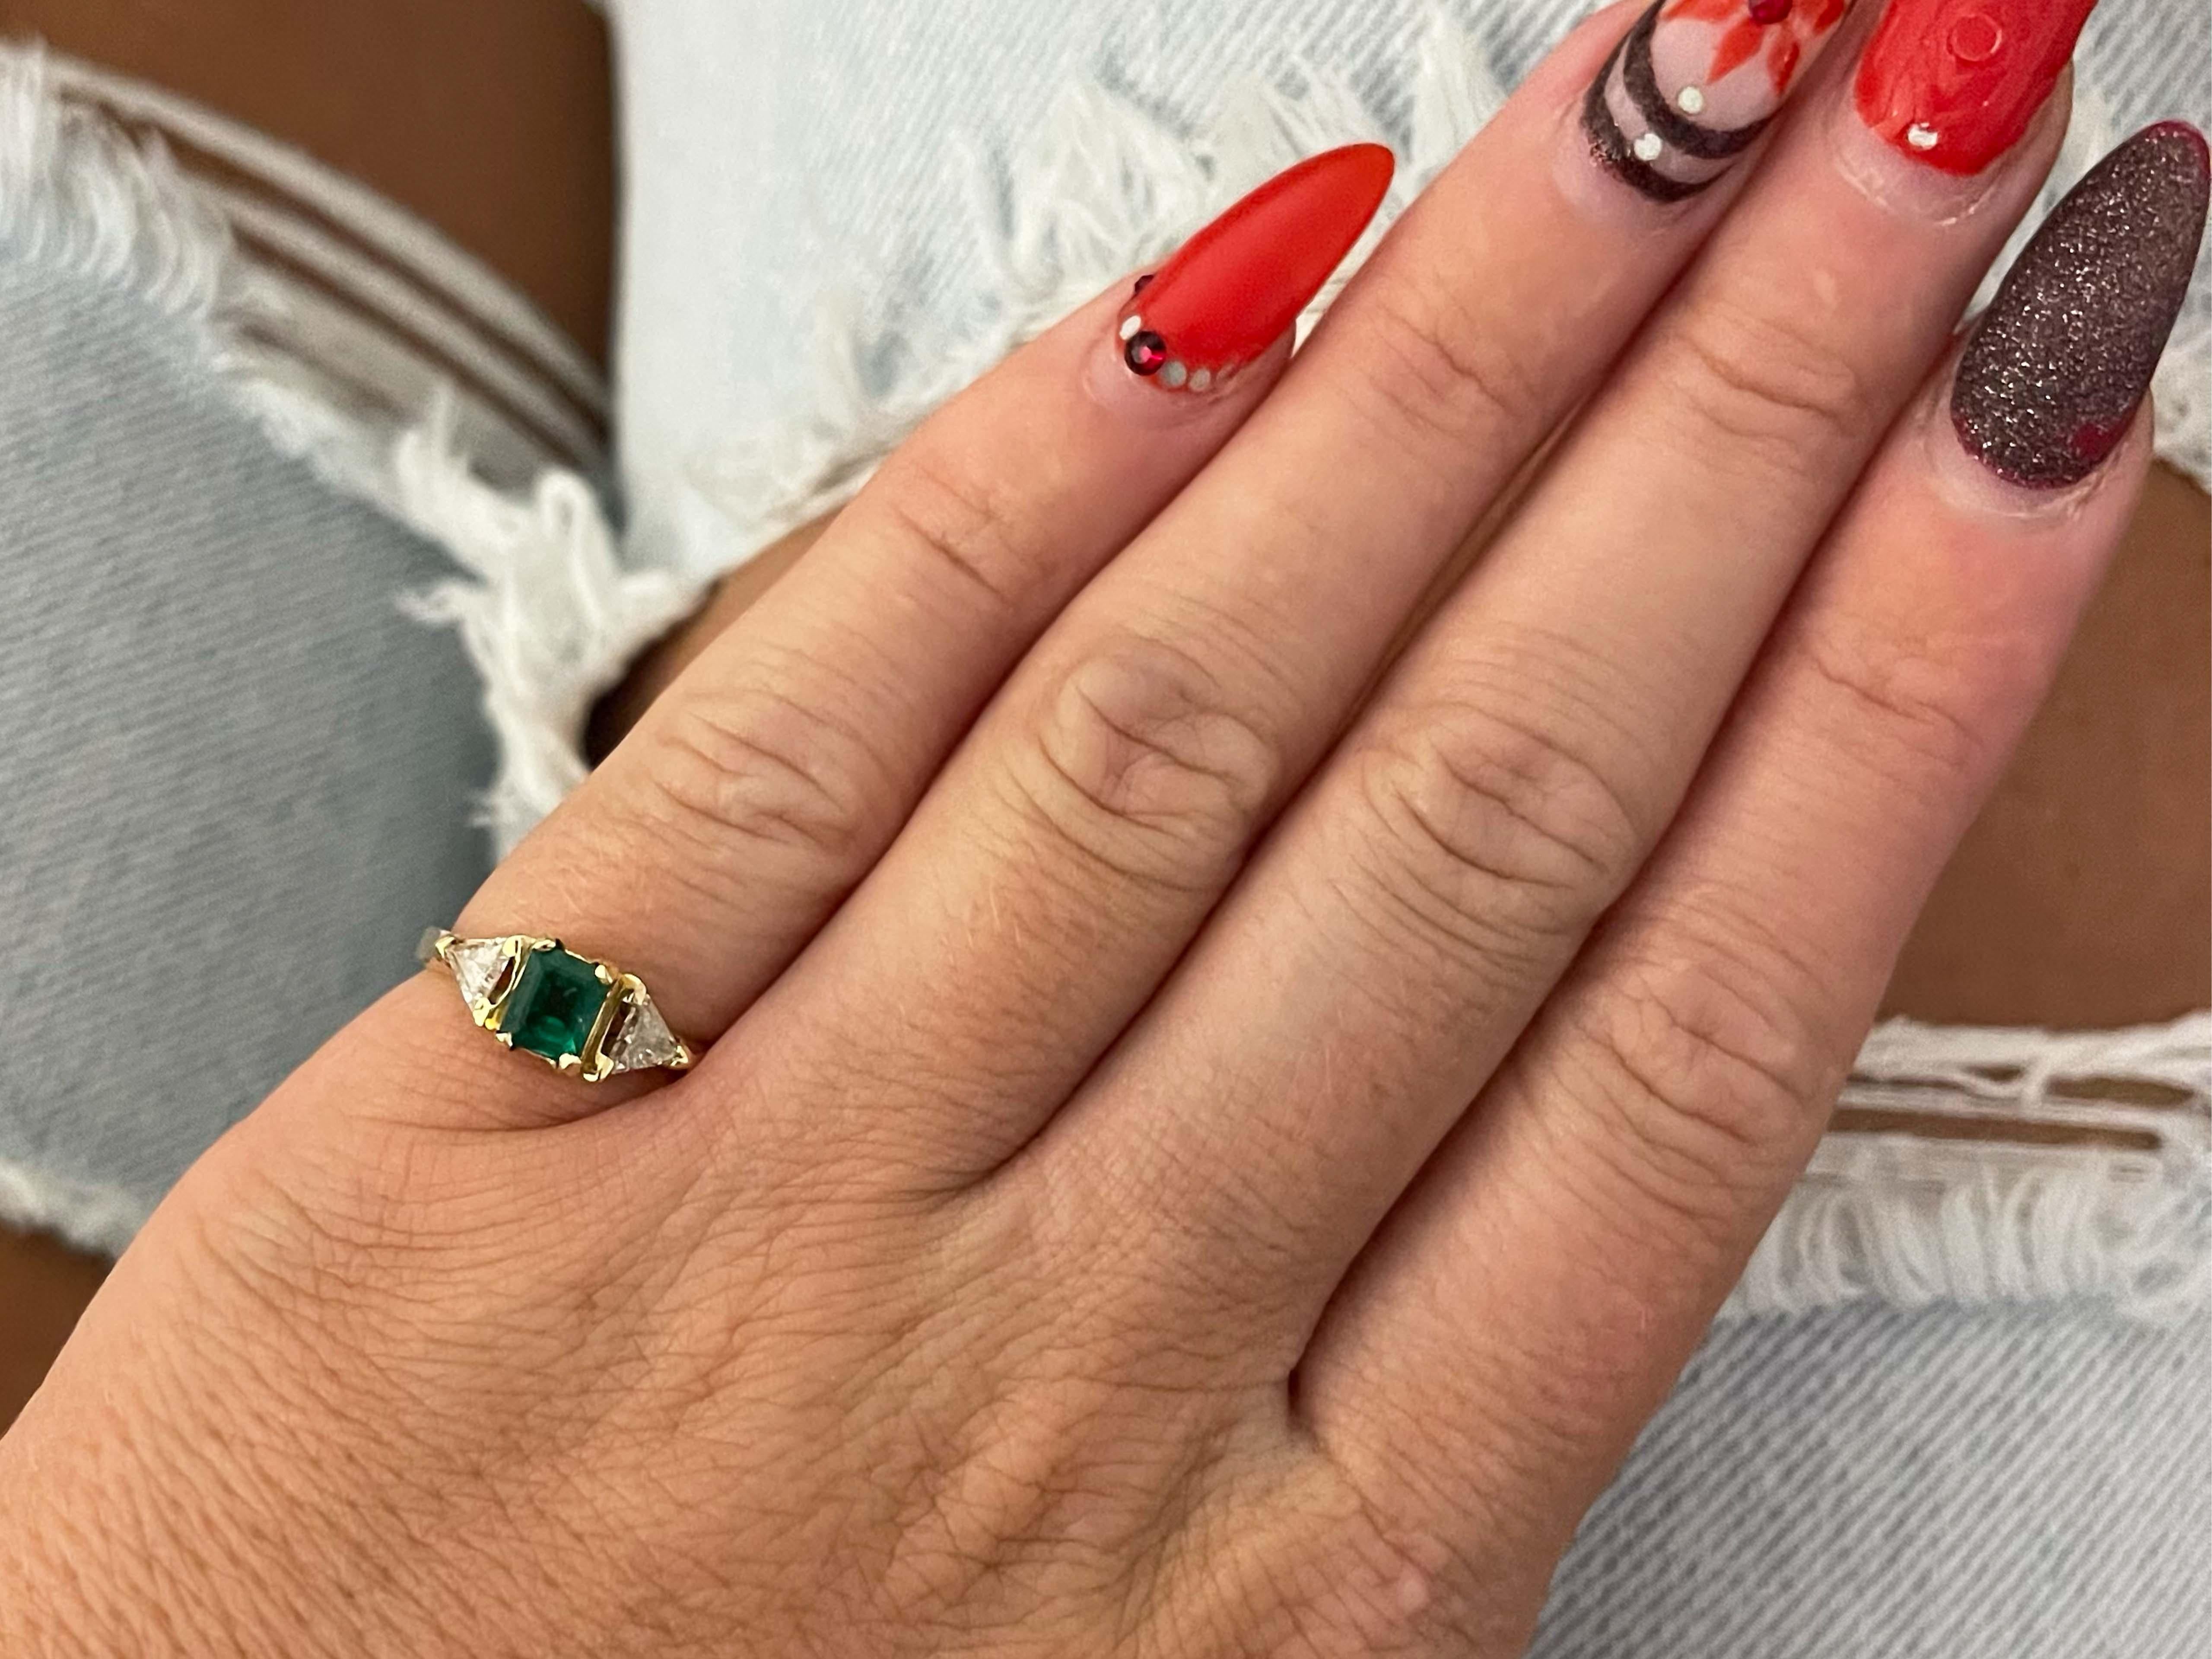 Item Specifications:

Metal: 14K Yellow Gold

Style: Statement Ring

Ring Size: 5 (resizing available for a fee)

Total Weight: 3.2 Grams

Ring Height: 6.6 mm

Gemstone Specifications:

Gemstone: 1 Green Emerald

Shape: Rectangle

Emerald